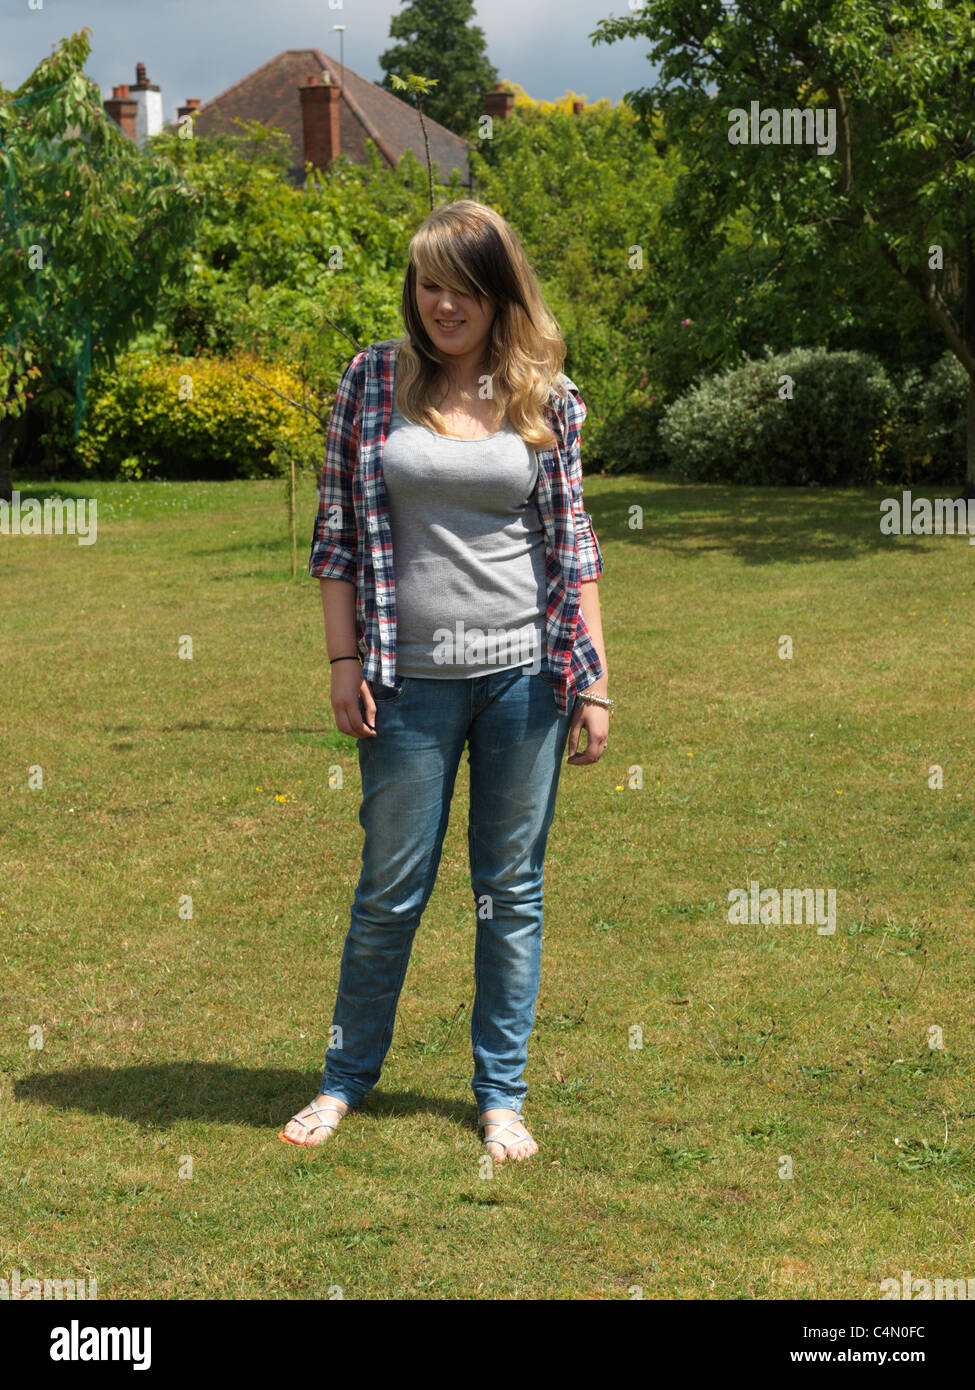 Young Woman Out In The Garden Wearing Shirt, Jeans And Sandals Stock Photo